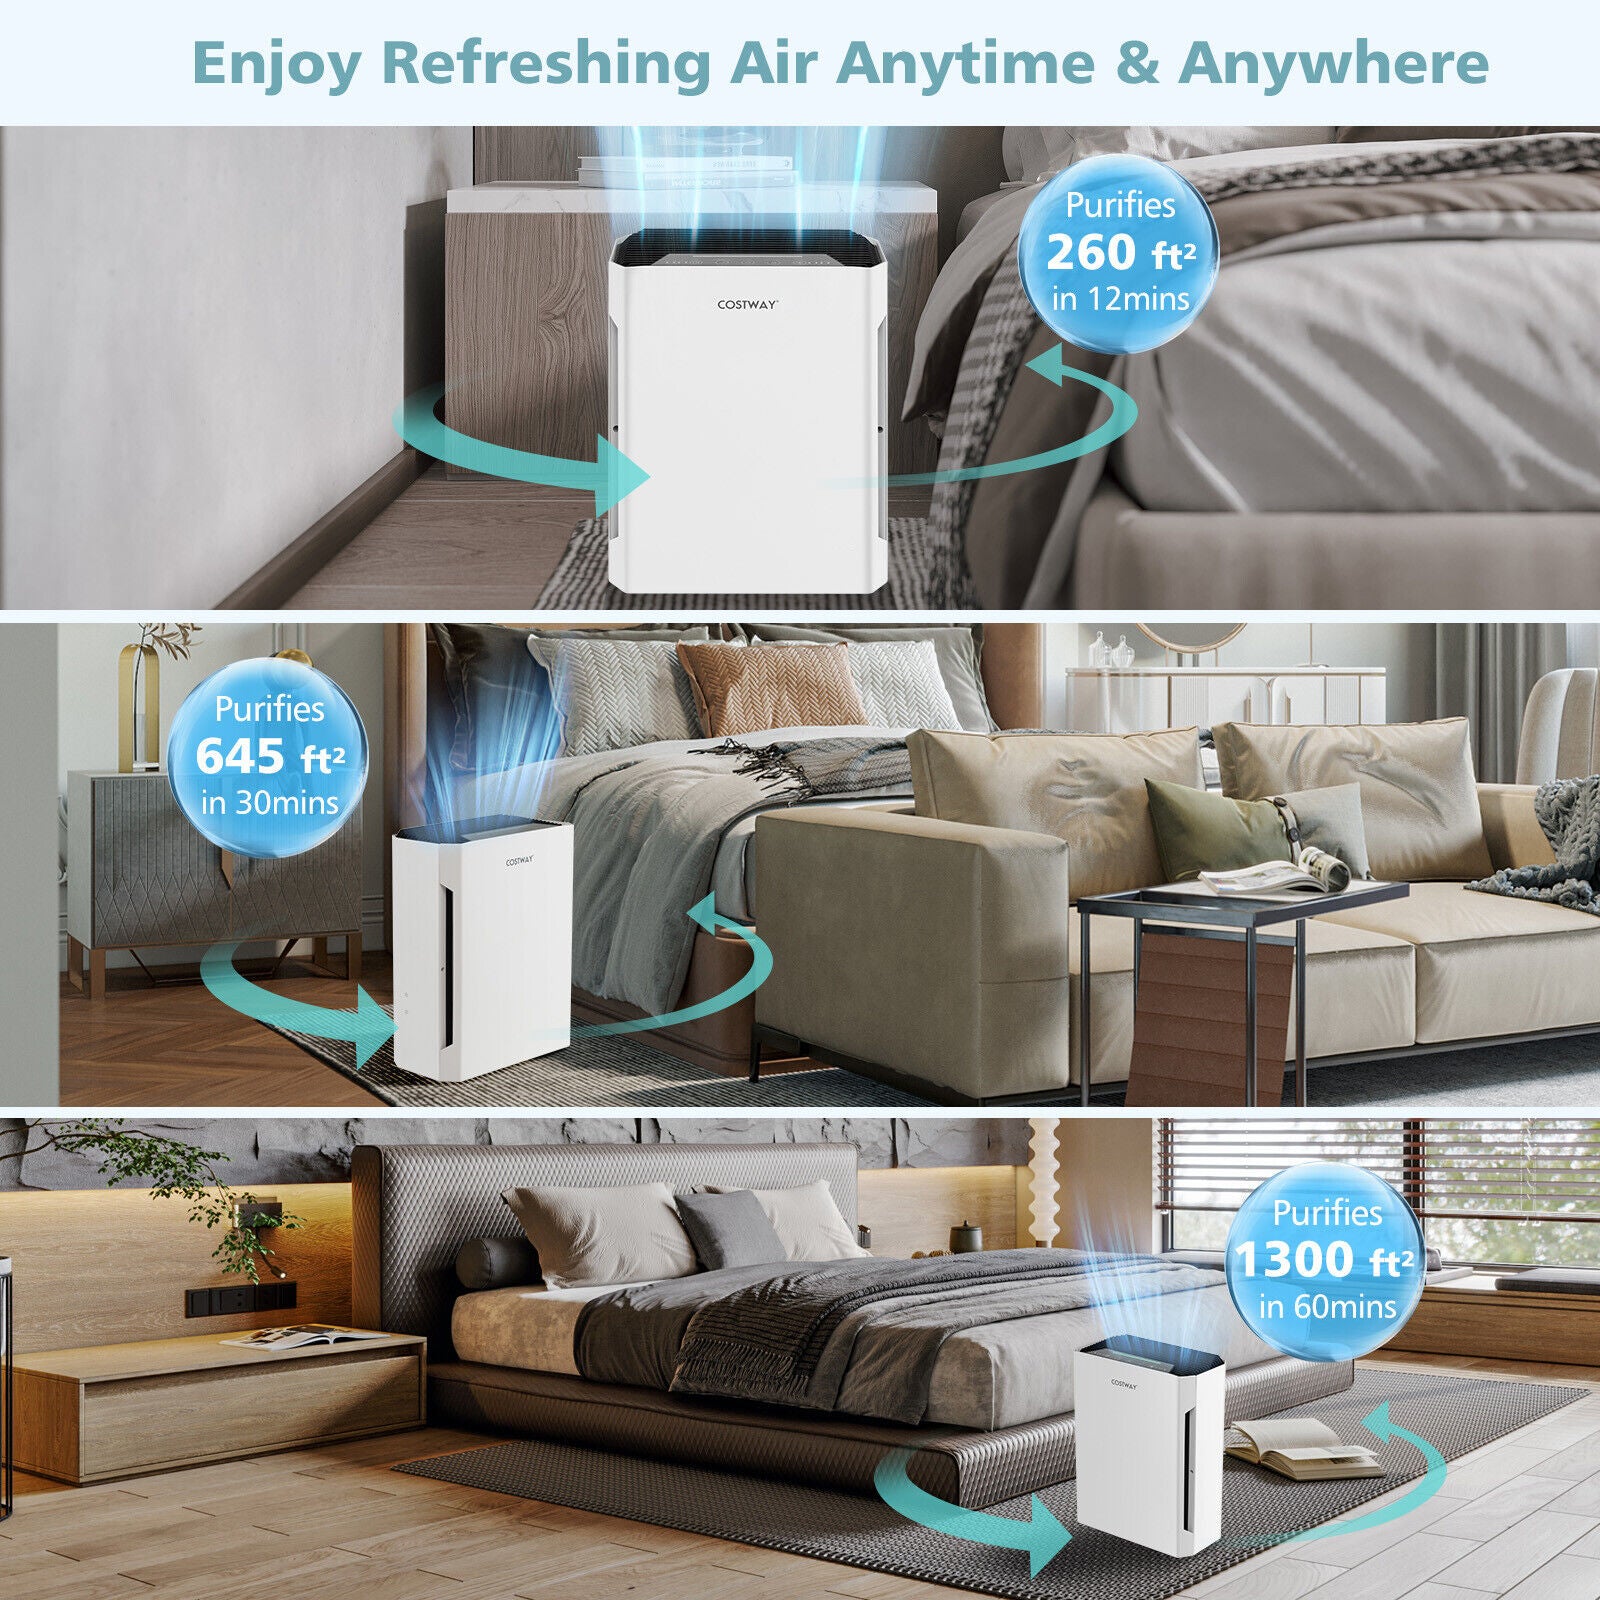 Large Purification Area & Wide Use: With 118CFM CADR, this high-efficiency true HEPA air purifier purifies rooms of 645 sq. ft in 30mins and purifies rooms of 1300 sq. ft in 60mins. It is suitable for various places, like the living room, bedroom, kitchen, pet shop, office, hotel, lab, restaurant, and more.